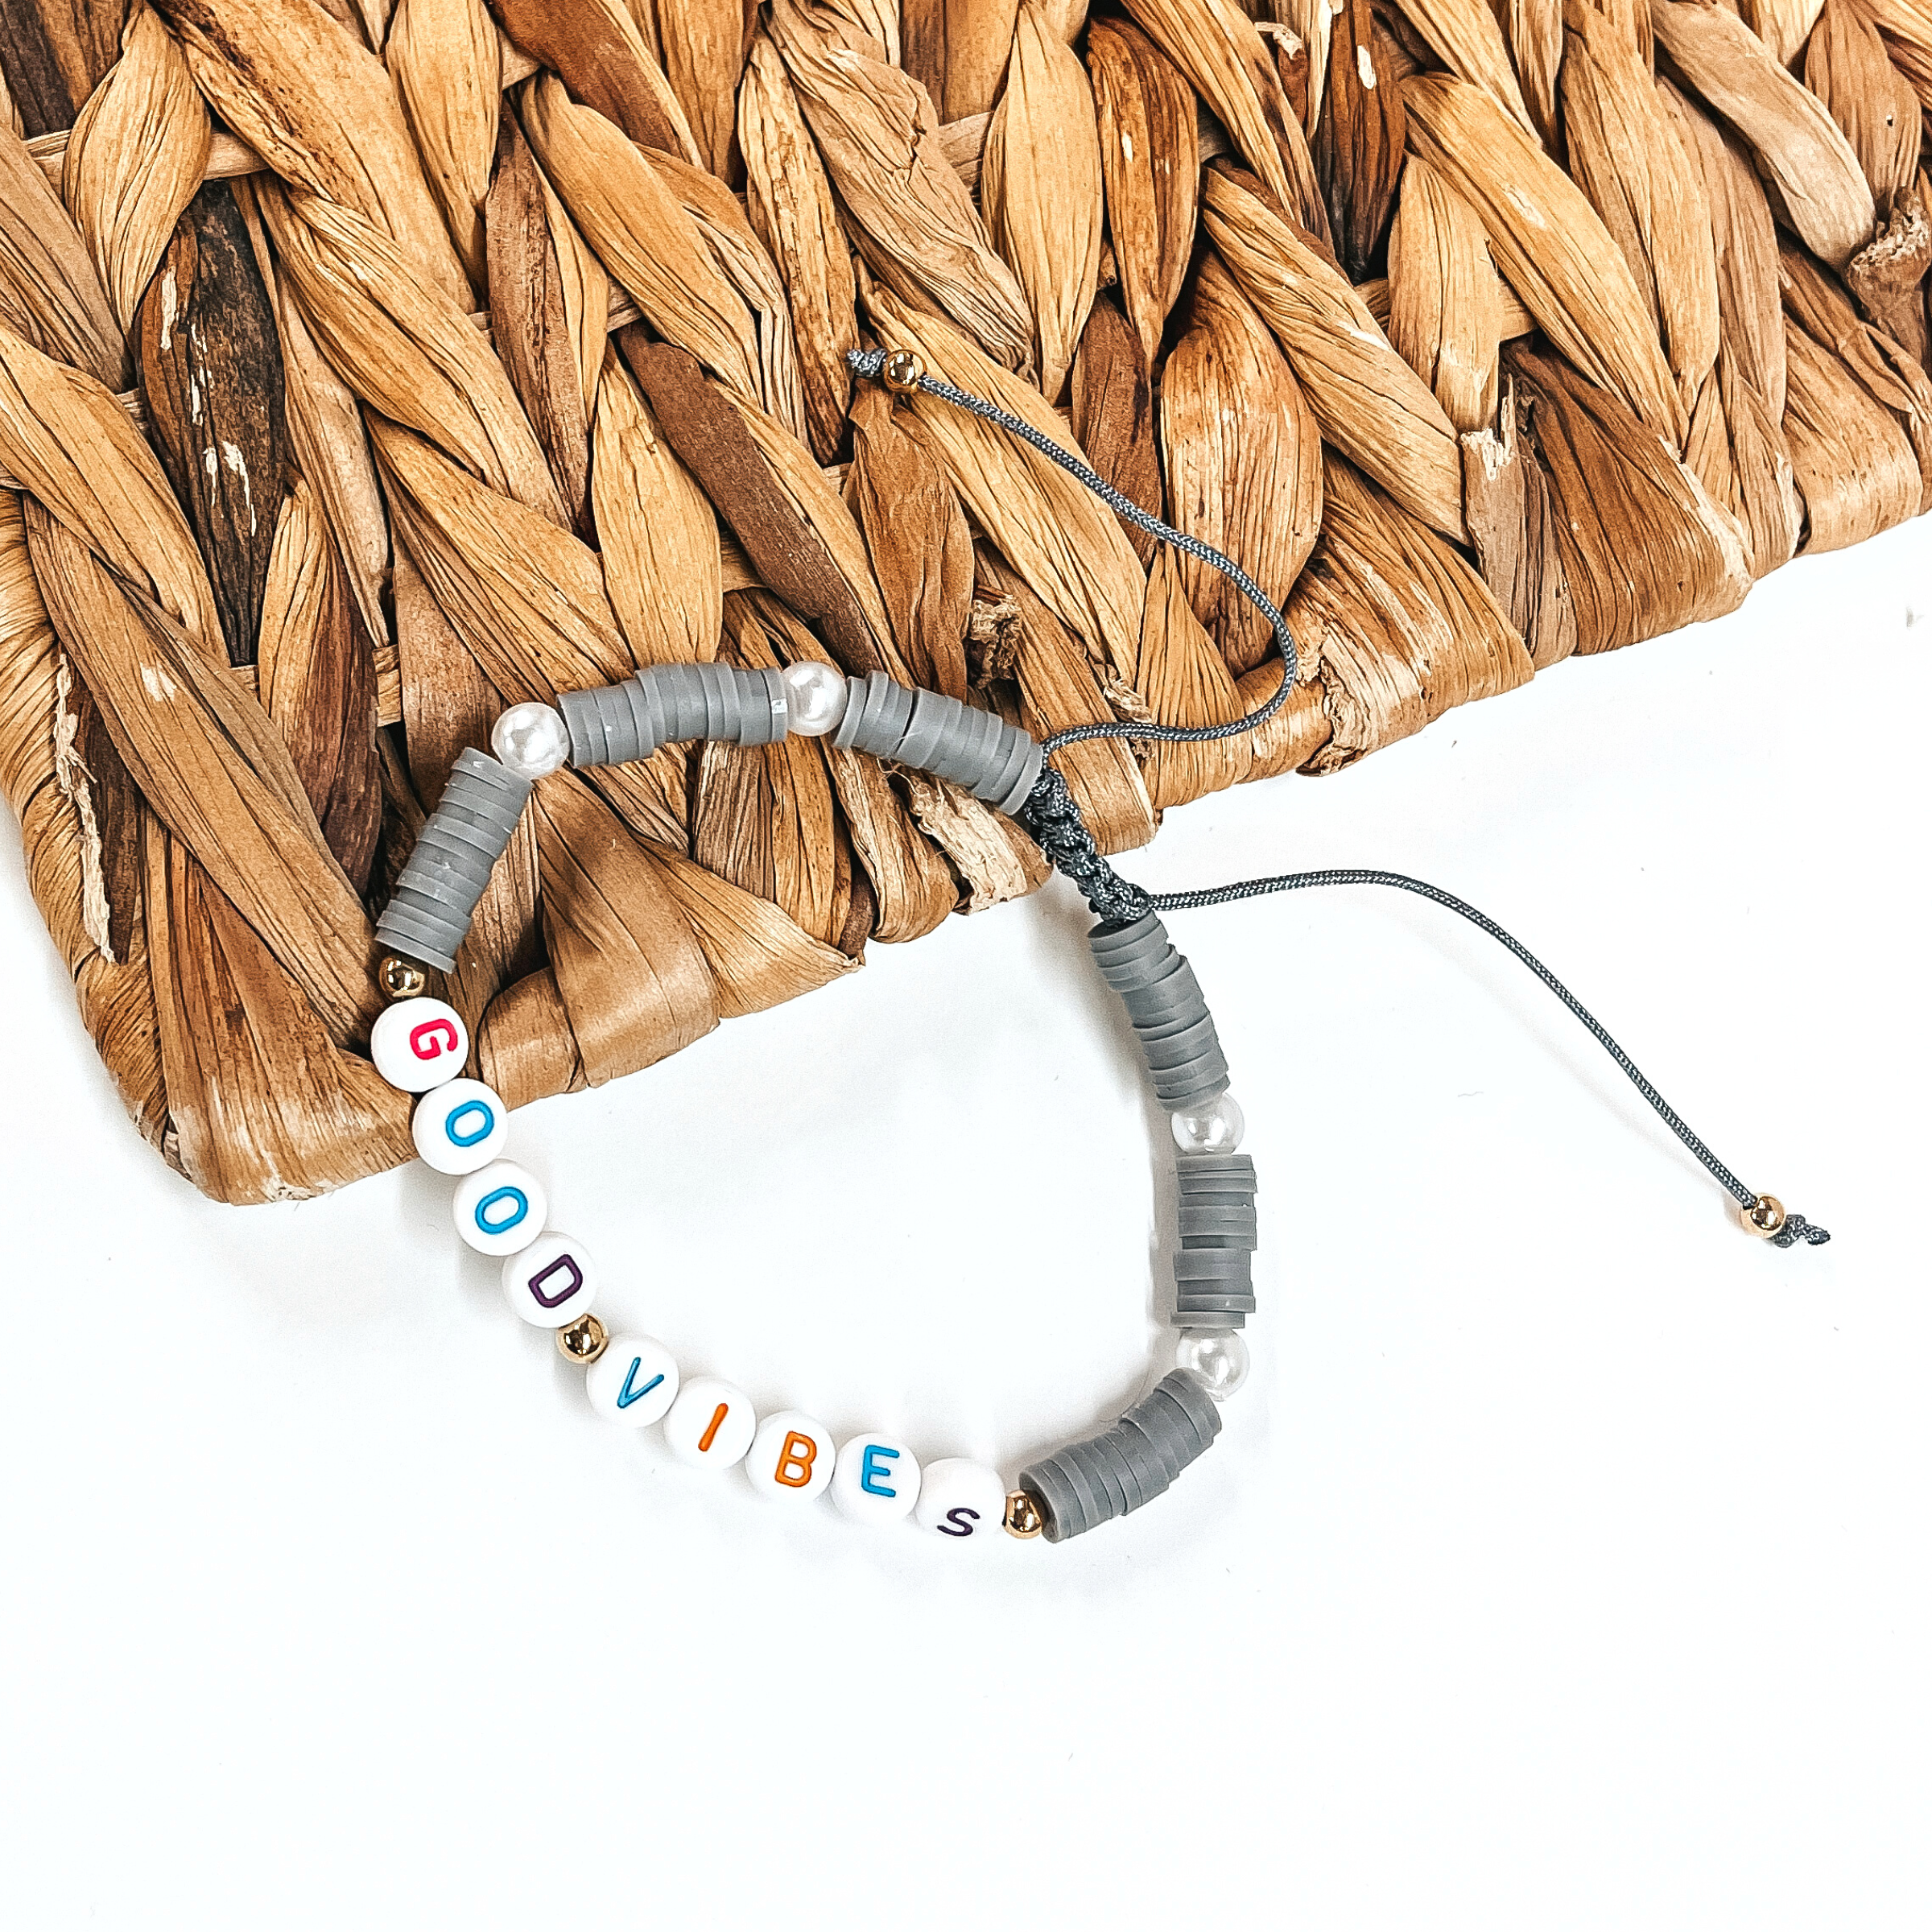 This is a disk beaded bracelet in gray that says, Good Vibes in  different colors. There are pearl spacers.  This bracelet is laying partly on a woven slate and on a white background.